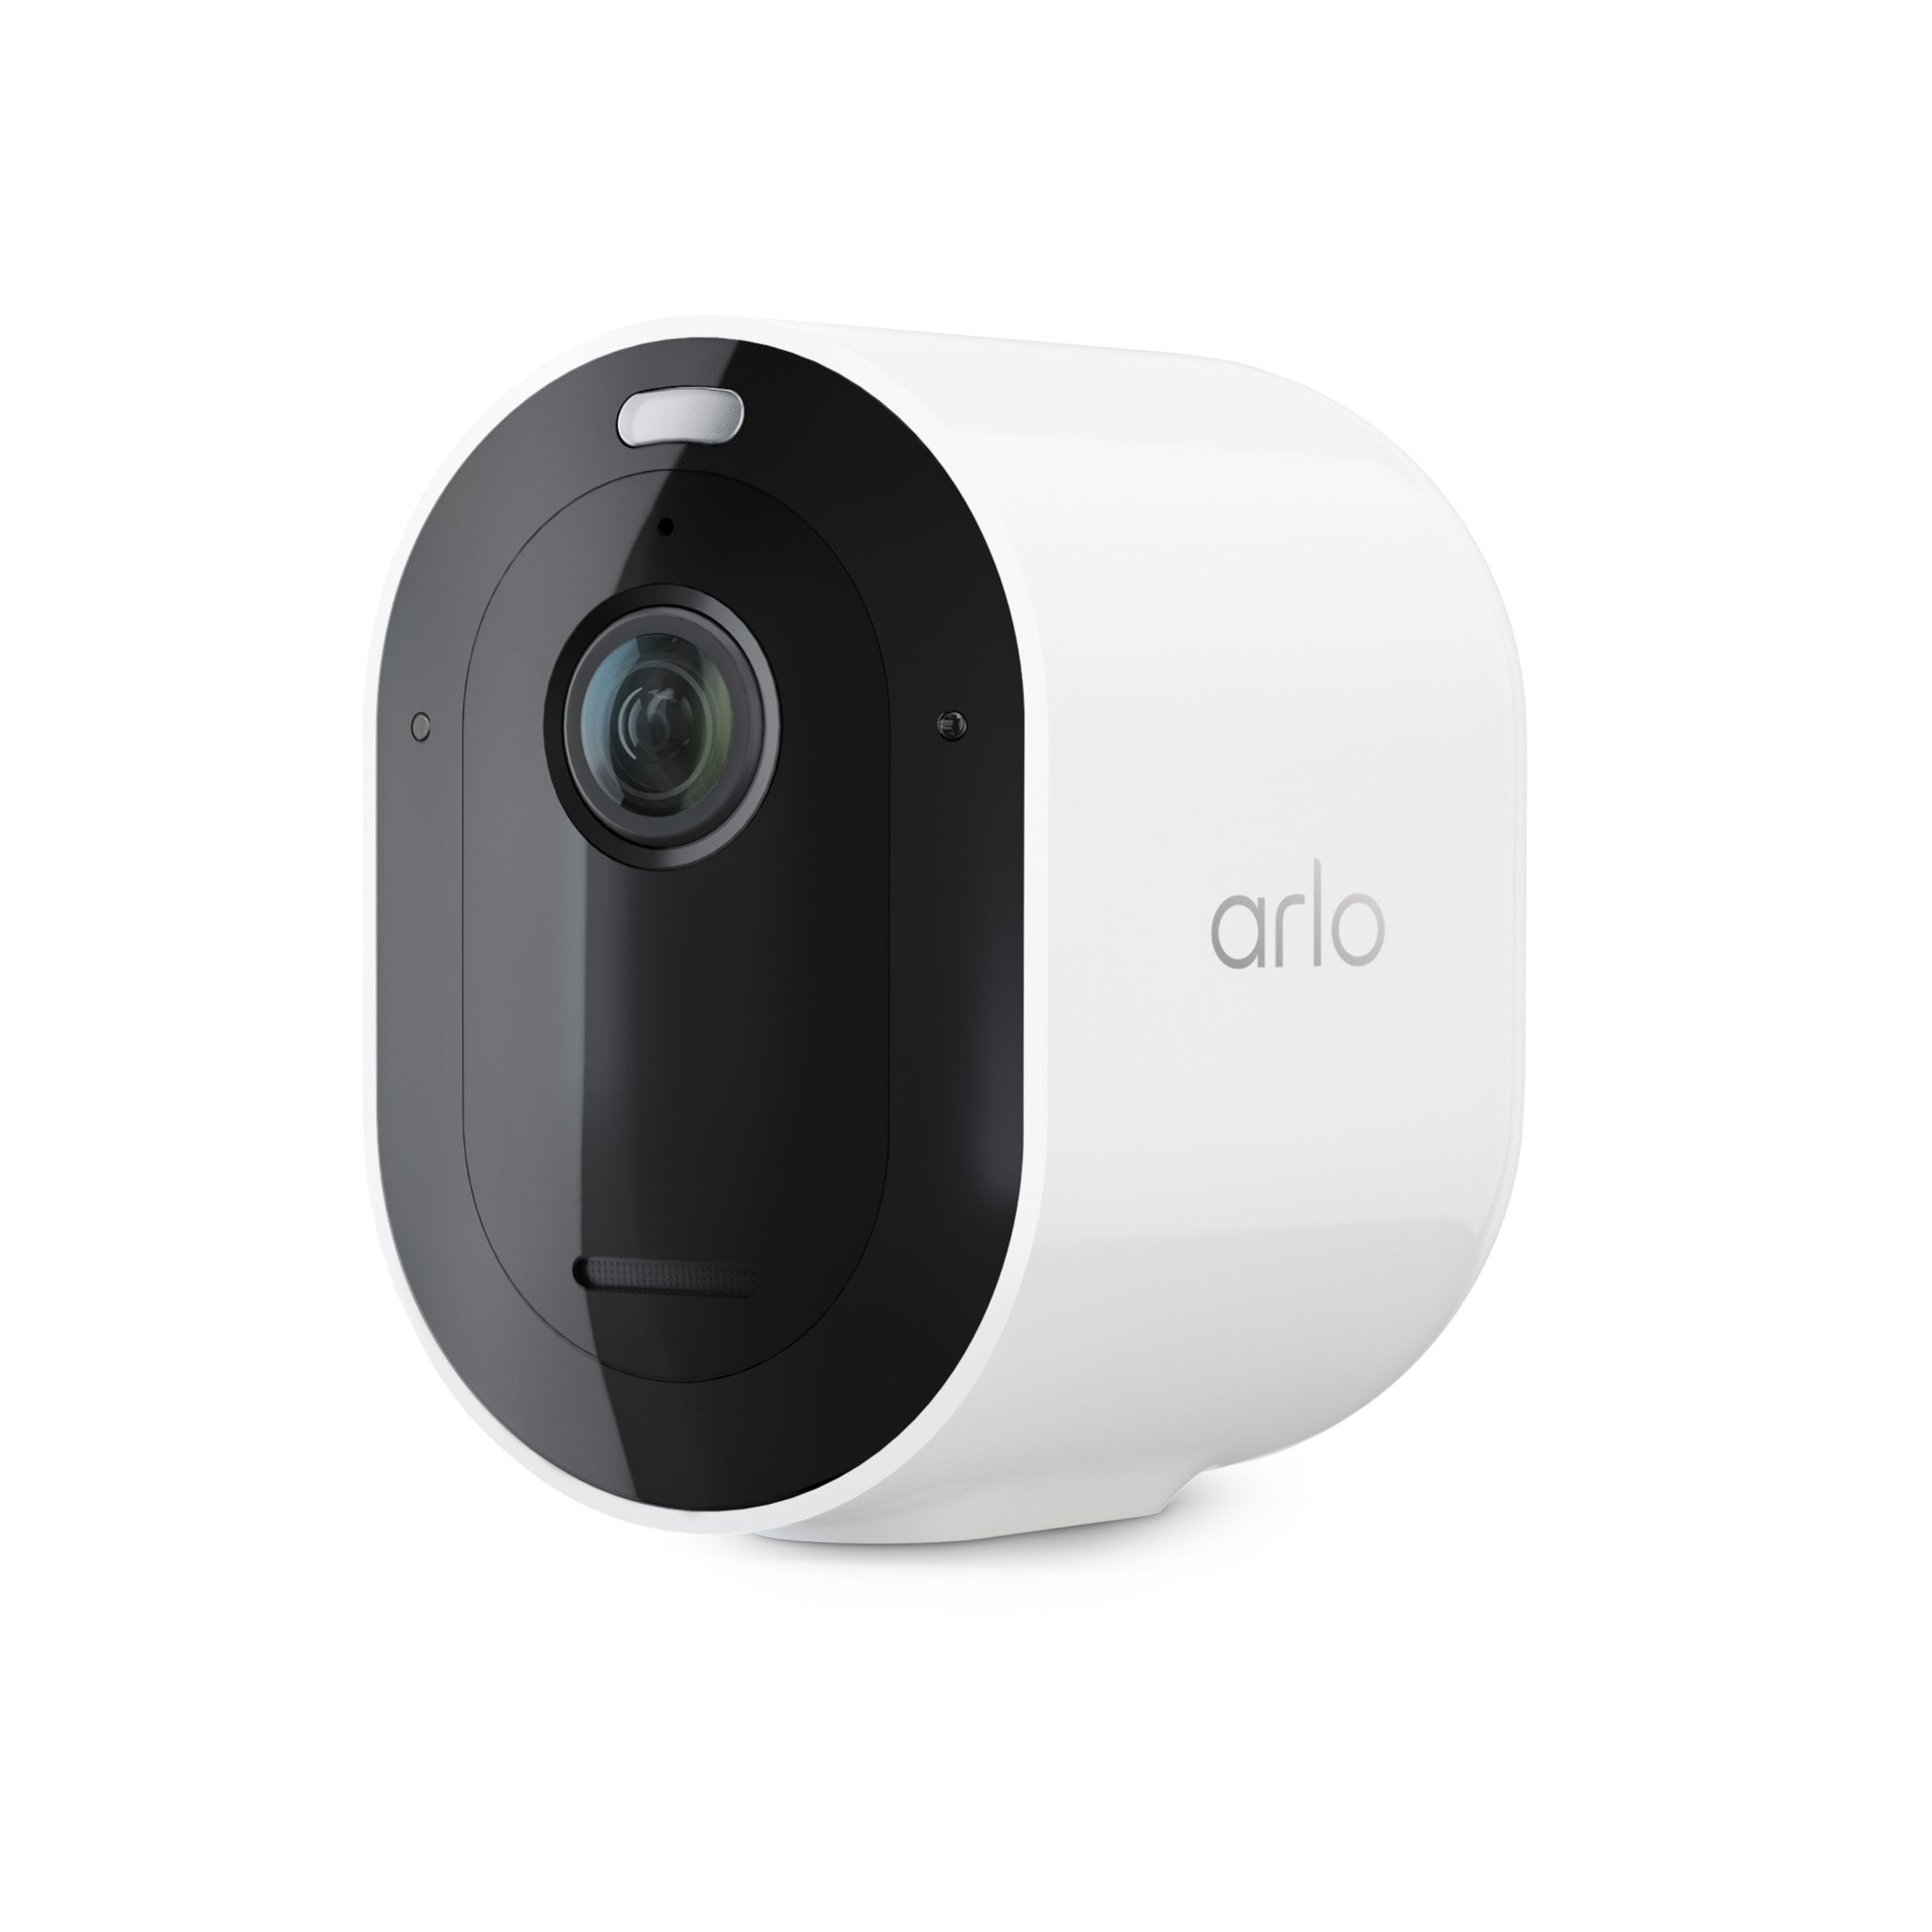 Arlo VMC4050P-100NAR Pro 4 Spotlight Camera Indoor/Outdoor 2K WiFi Security Camera with Color Night Vision White - Certified Refurbished